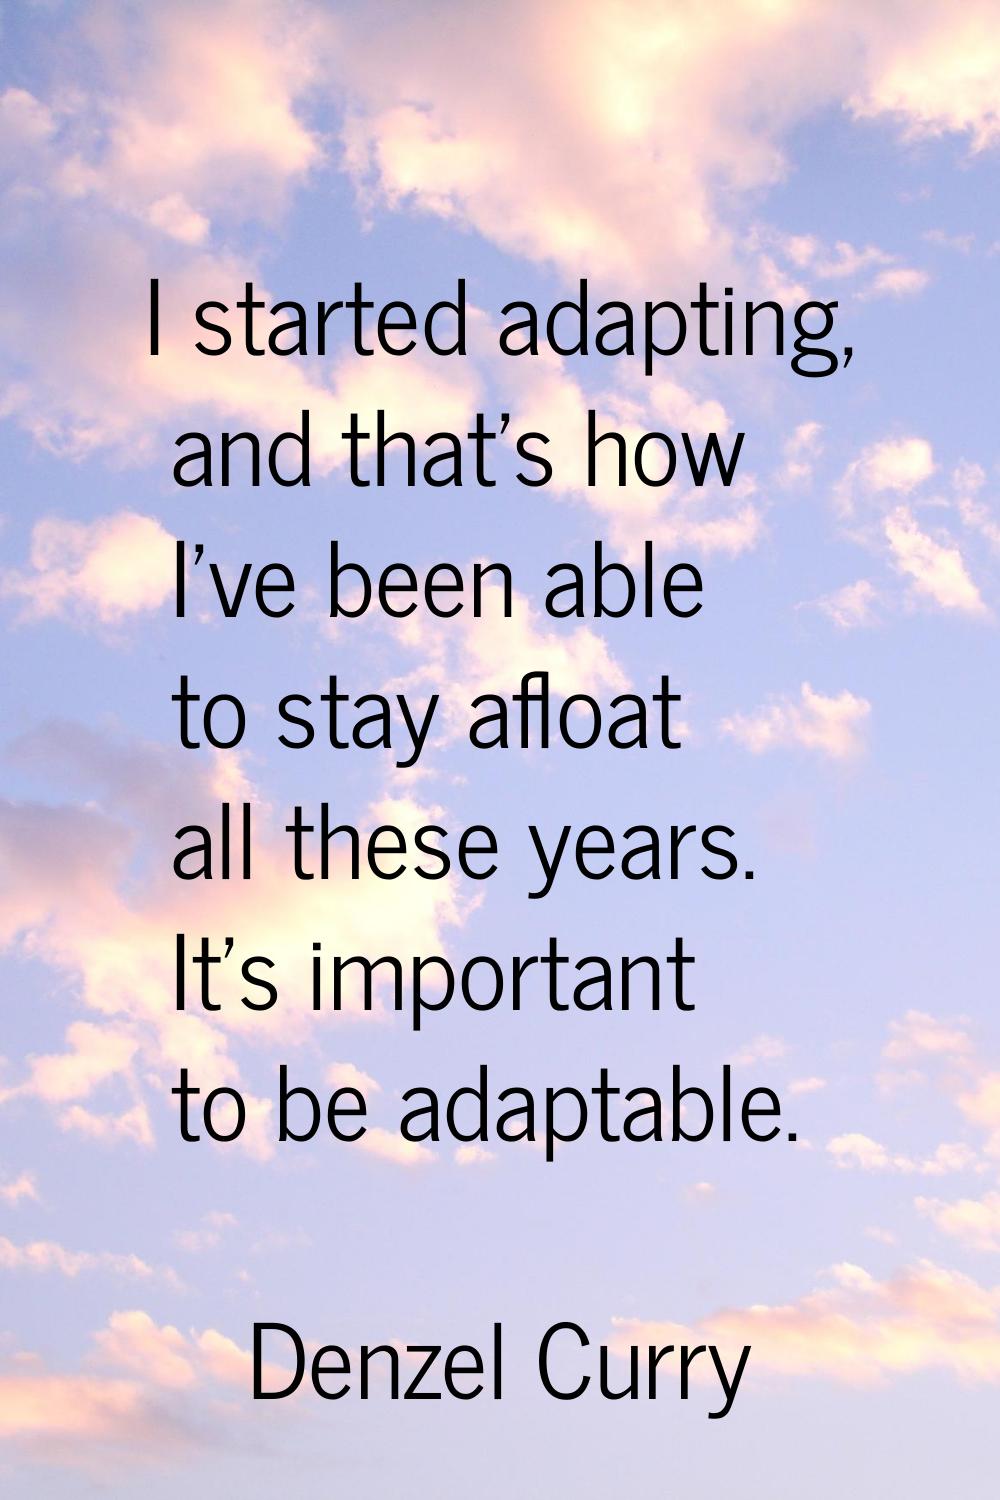 I started adapting, and that's how I've been able to stay afloat all these years. It's important to